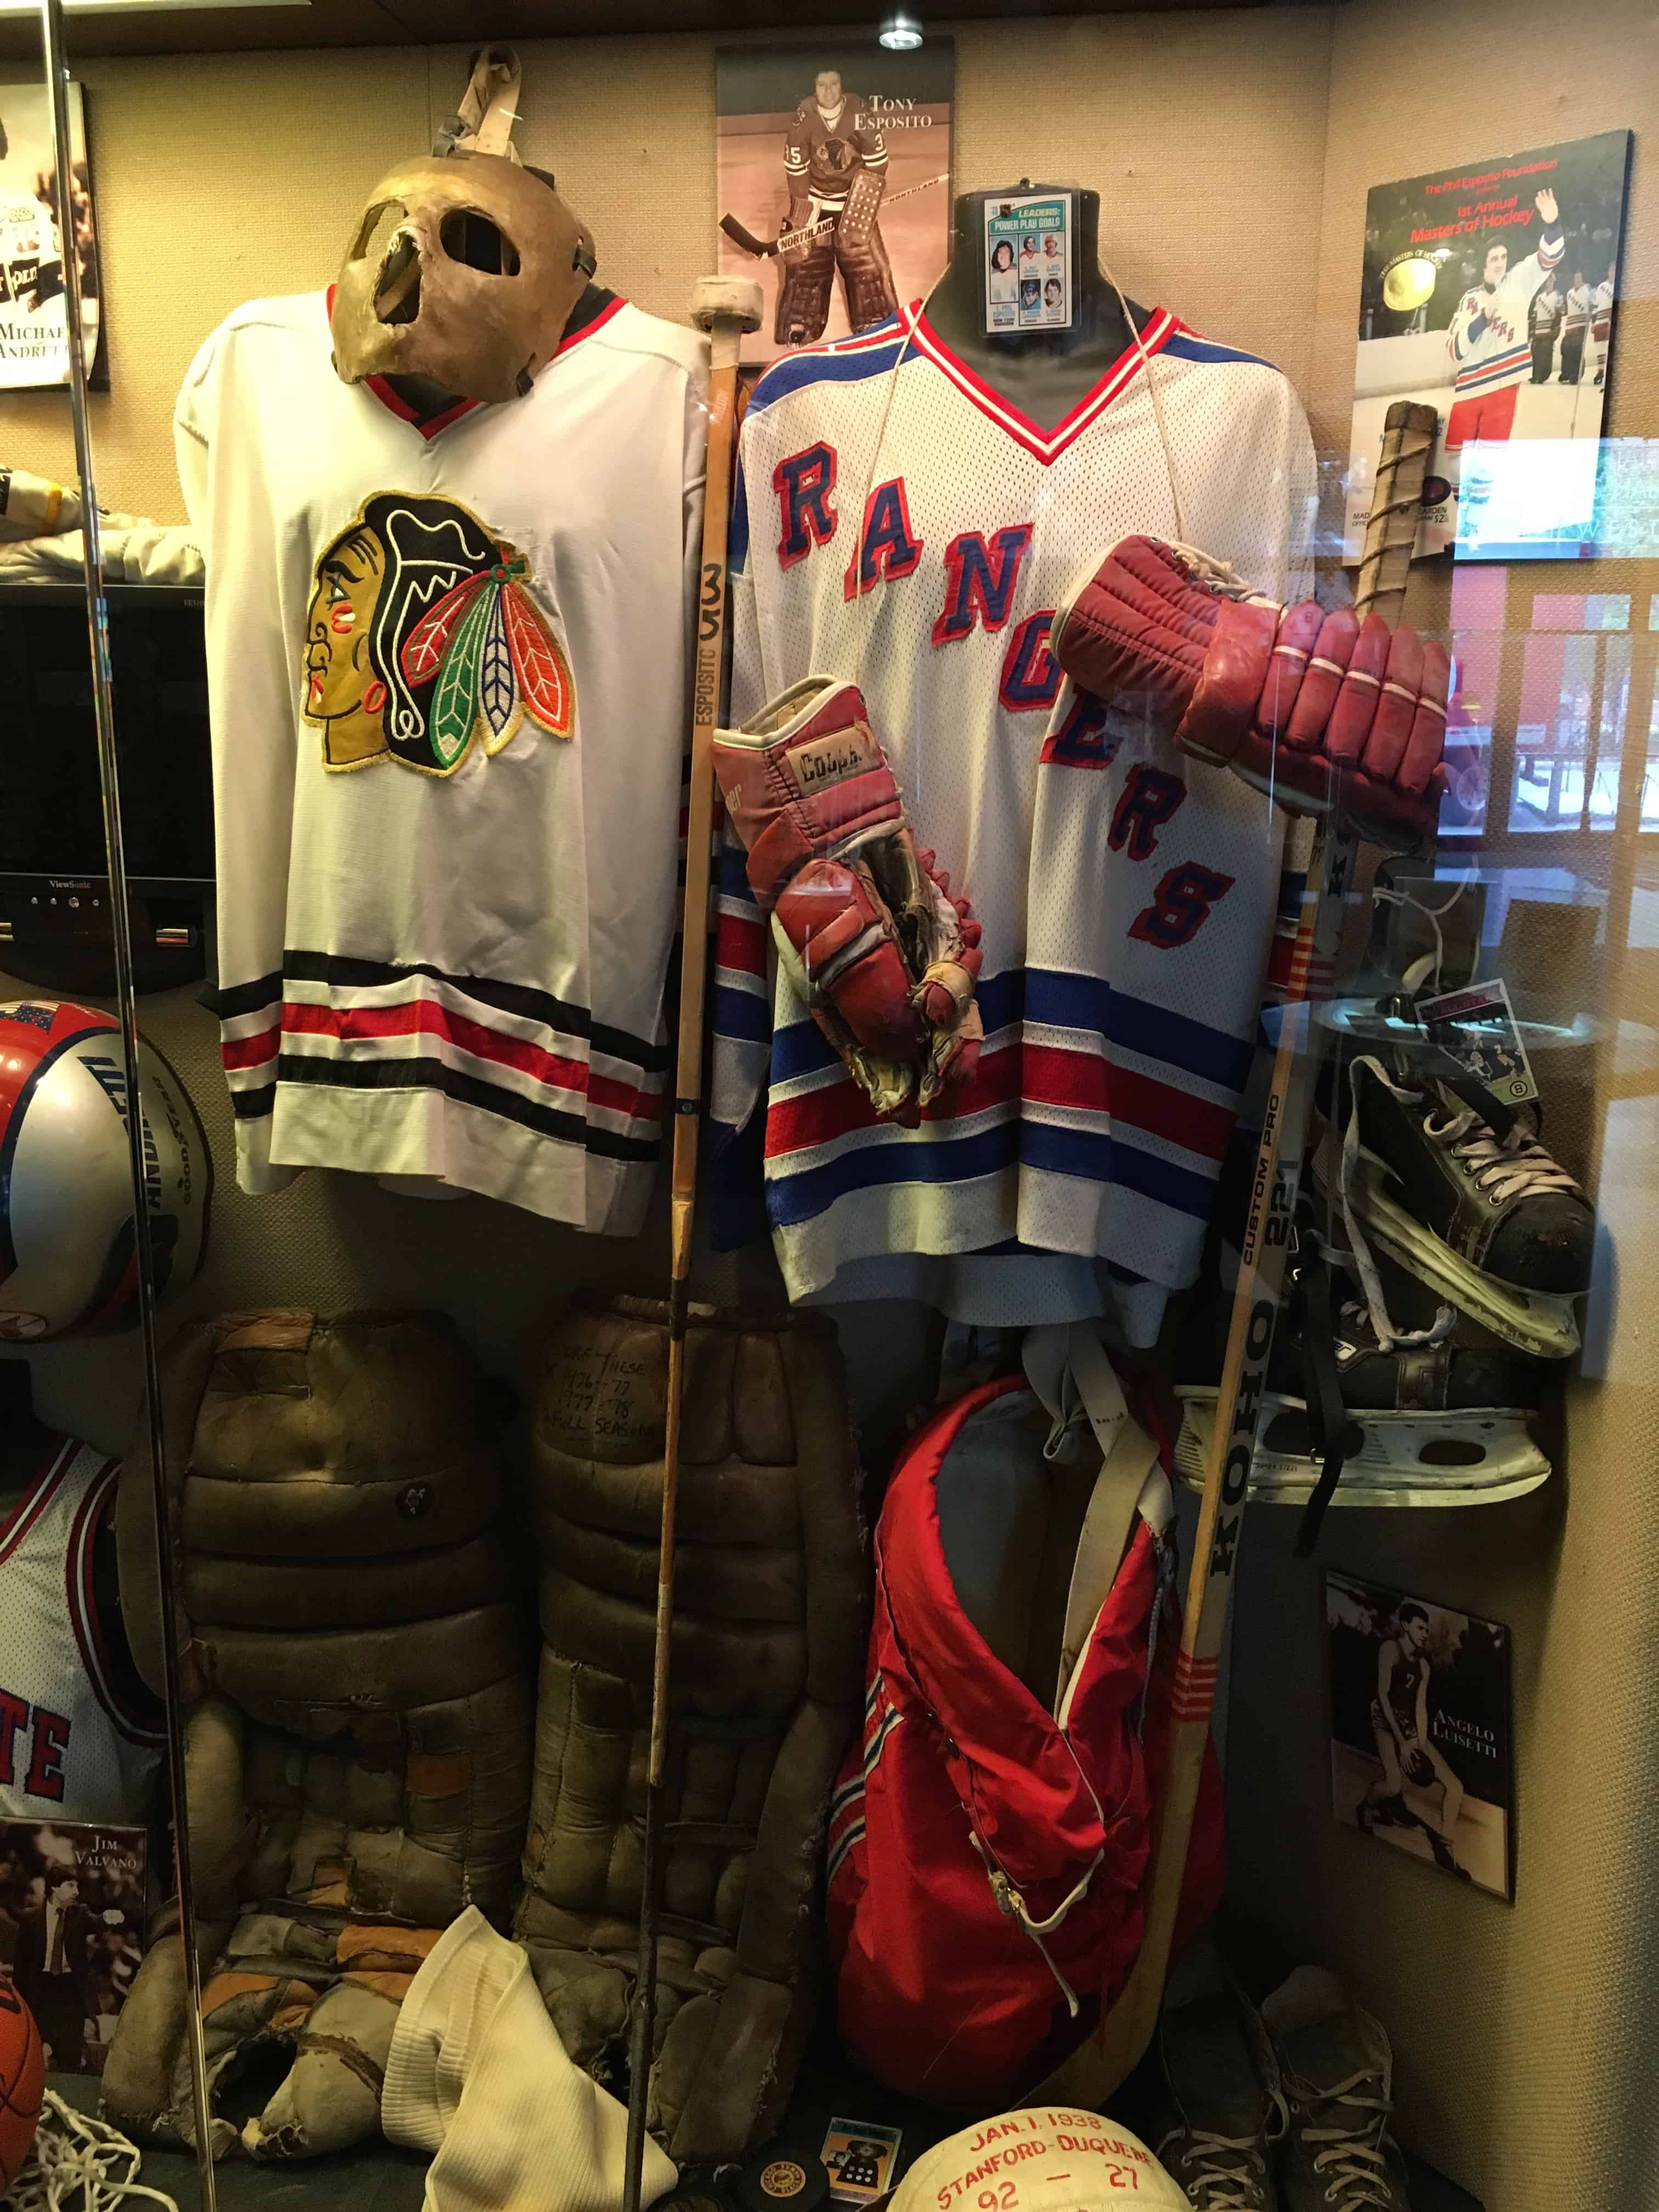 Hockey display at the National Italian American Sports Hall of Fame